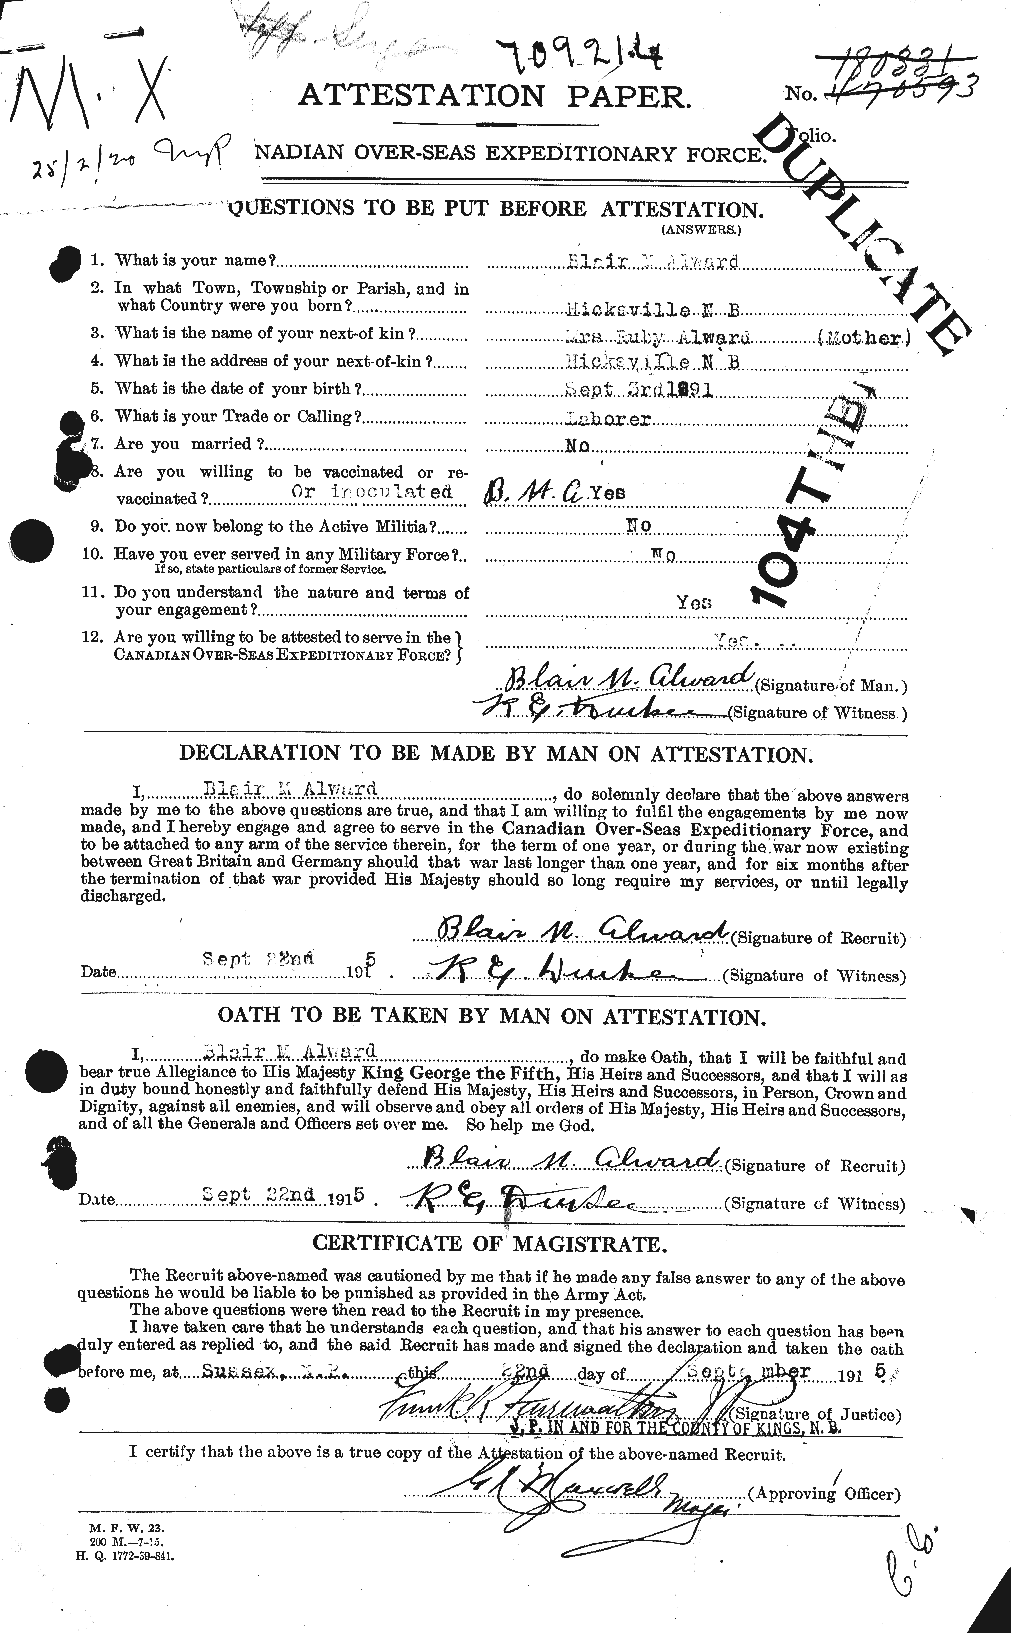 Personnel Records of the First World War - CEF 208060a